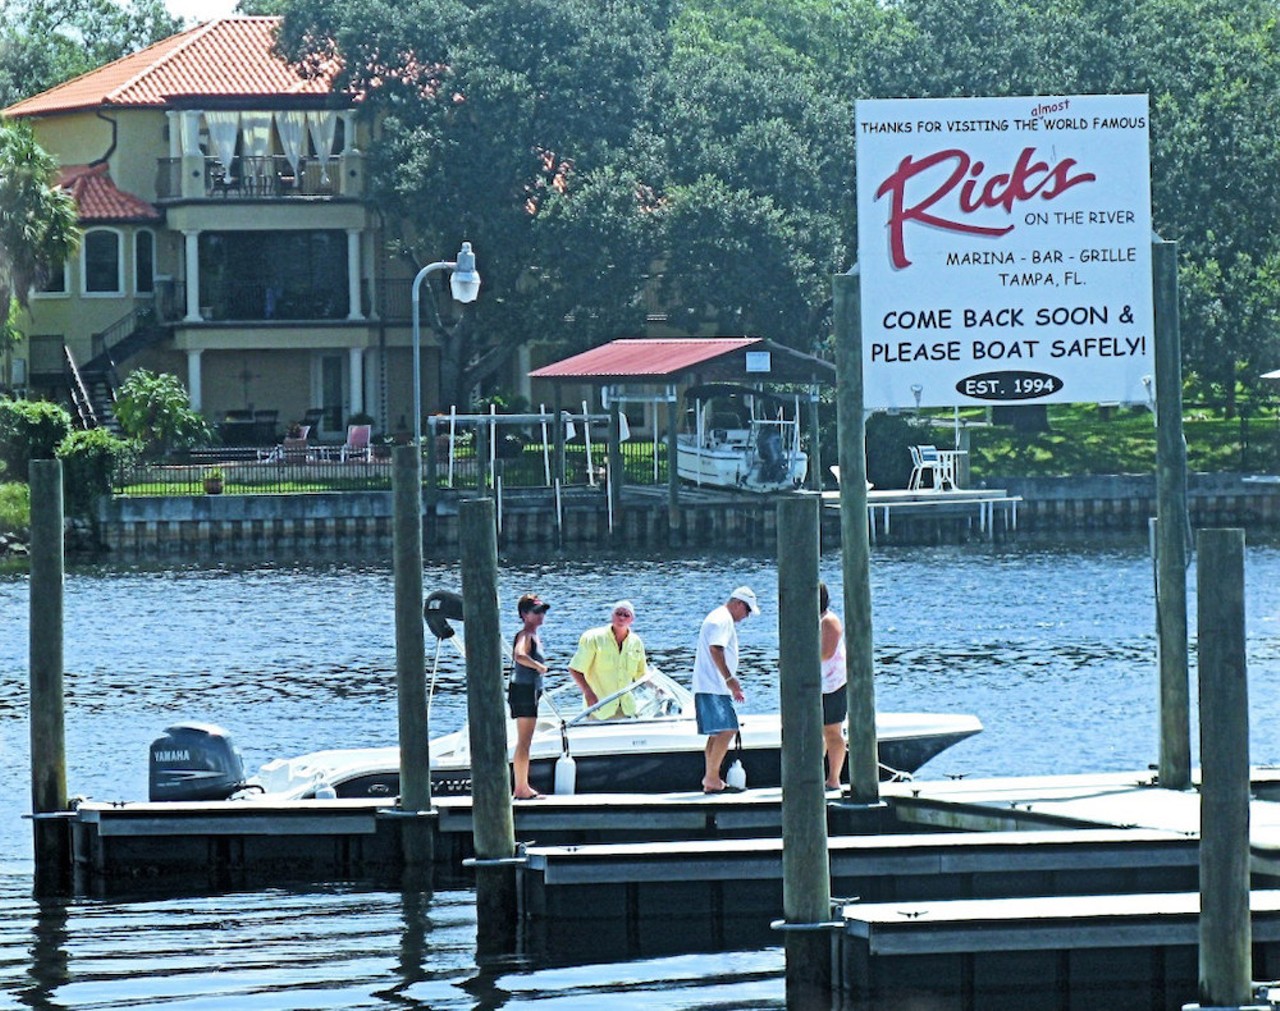 Rick’s on the River
2305 N Willow Ave., Tampa. 813-251-0369
This classic Tampa river rat pub with its own marina has the perfect atmosphere for those searching for a cold one and a seat at the oyster bar.
Photo via Rick’s on the River Website